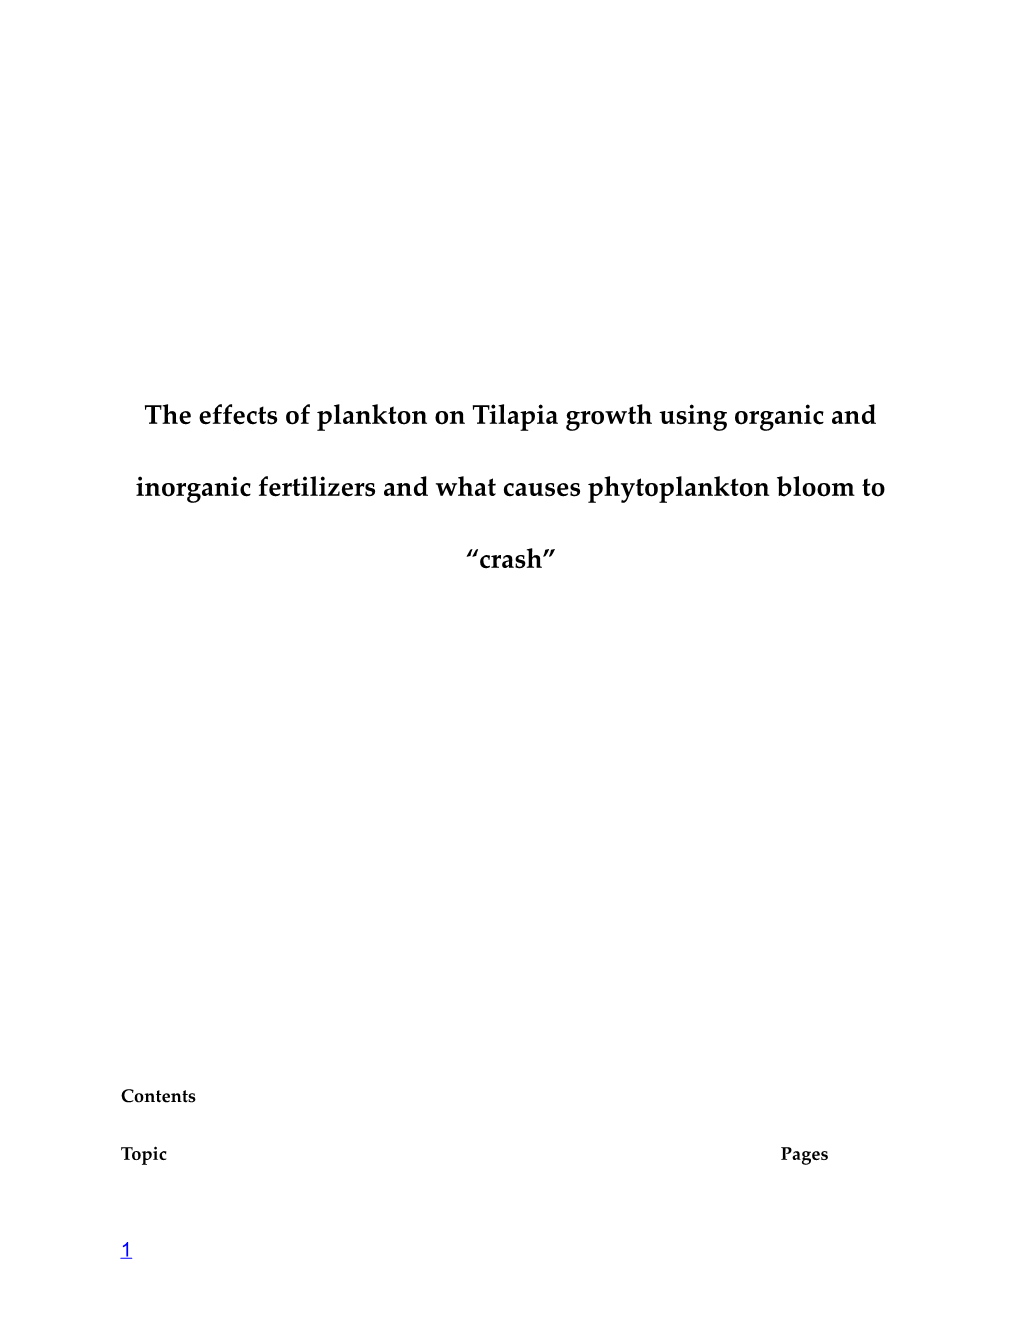 The Effects of Plankton on Tilapia Growth Using Organic and Inorganic Fertilizers and What